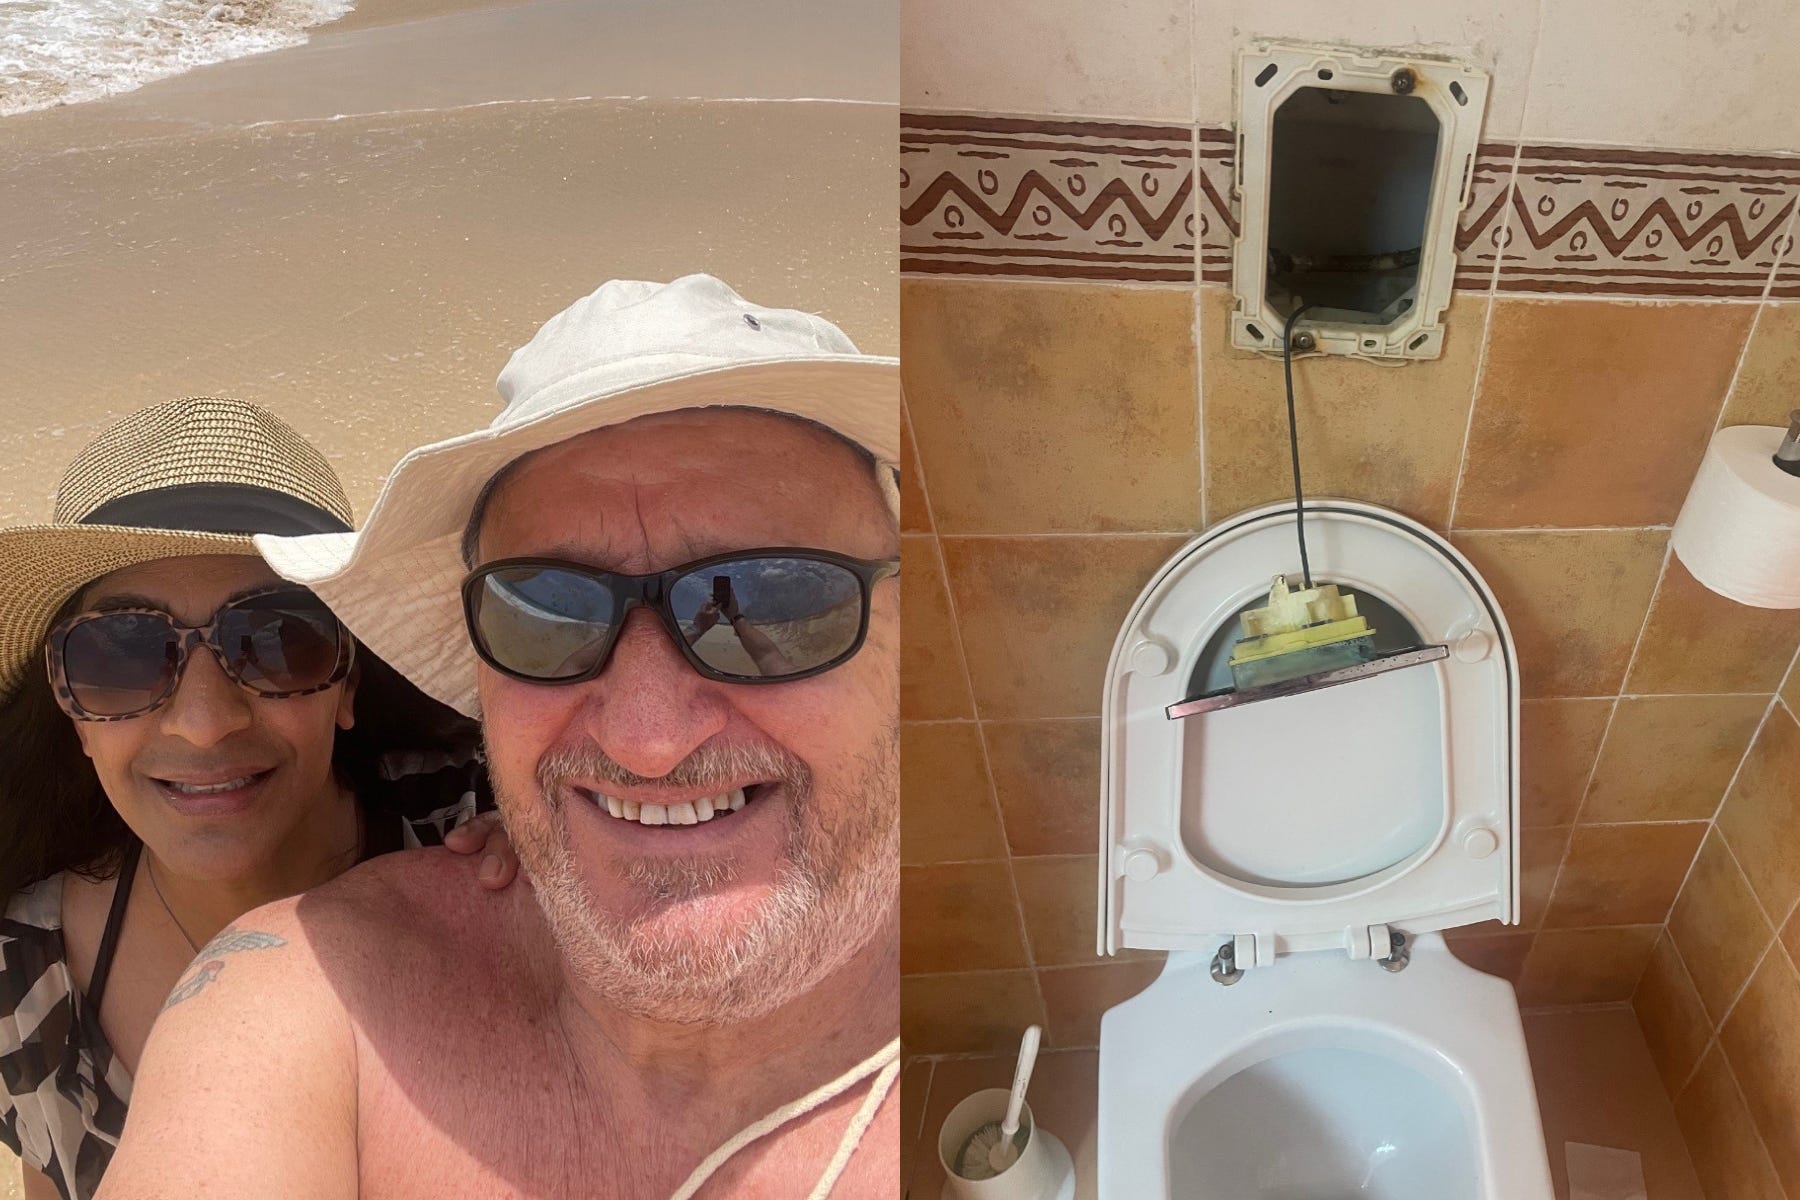 Clive Murray and his wife, Rosie, on holiday – and the damaged toilet